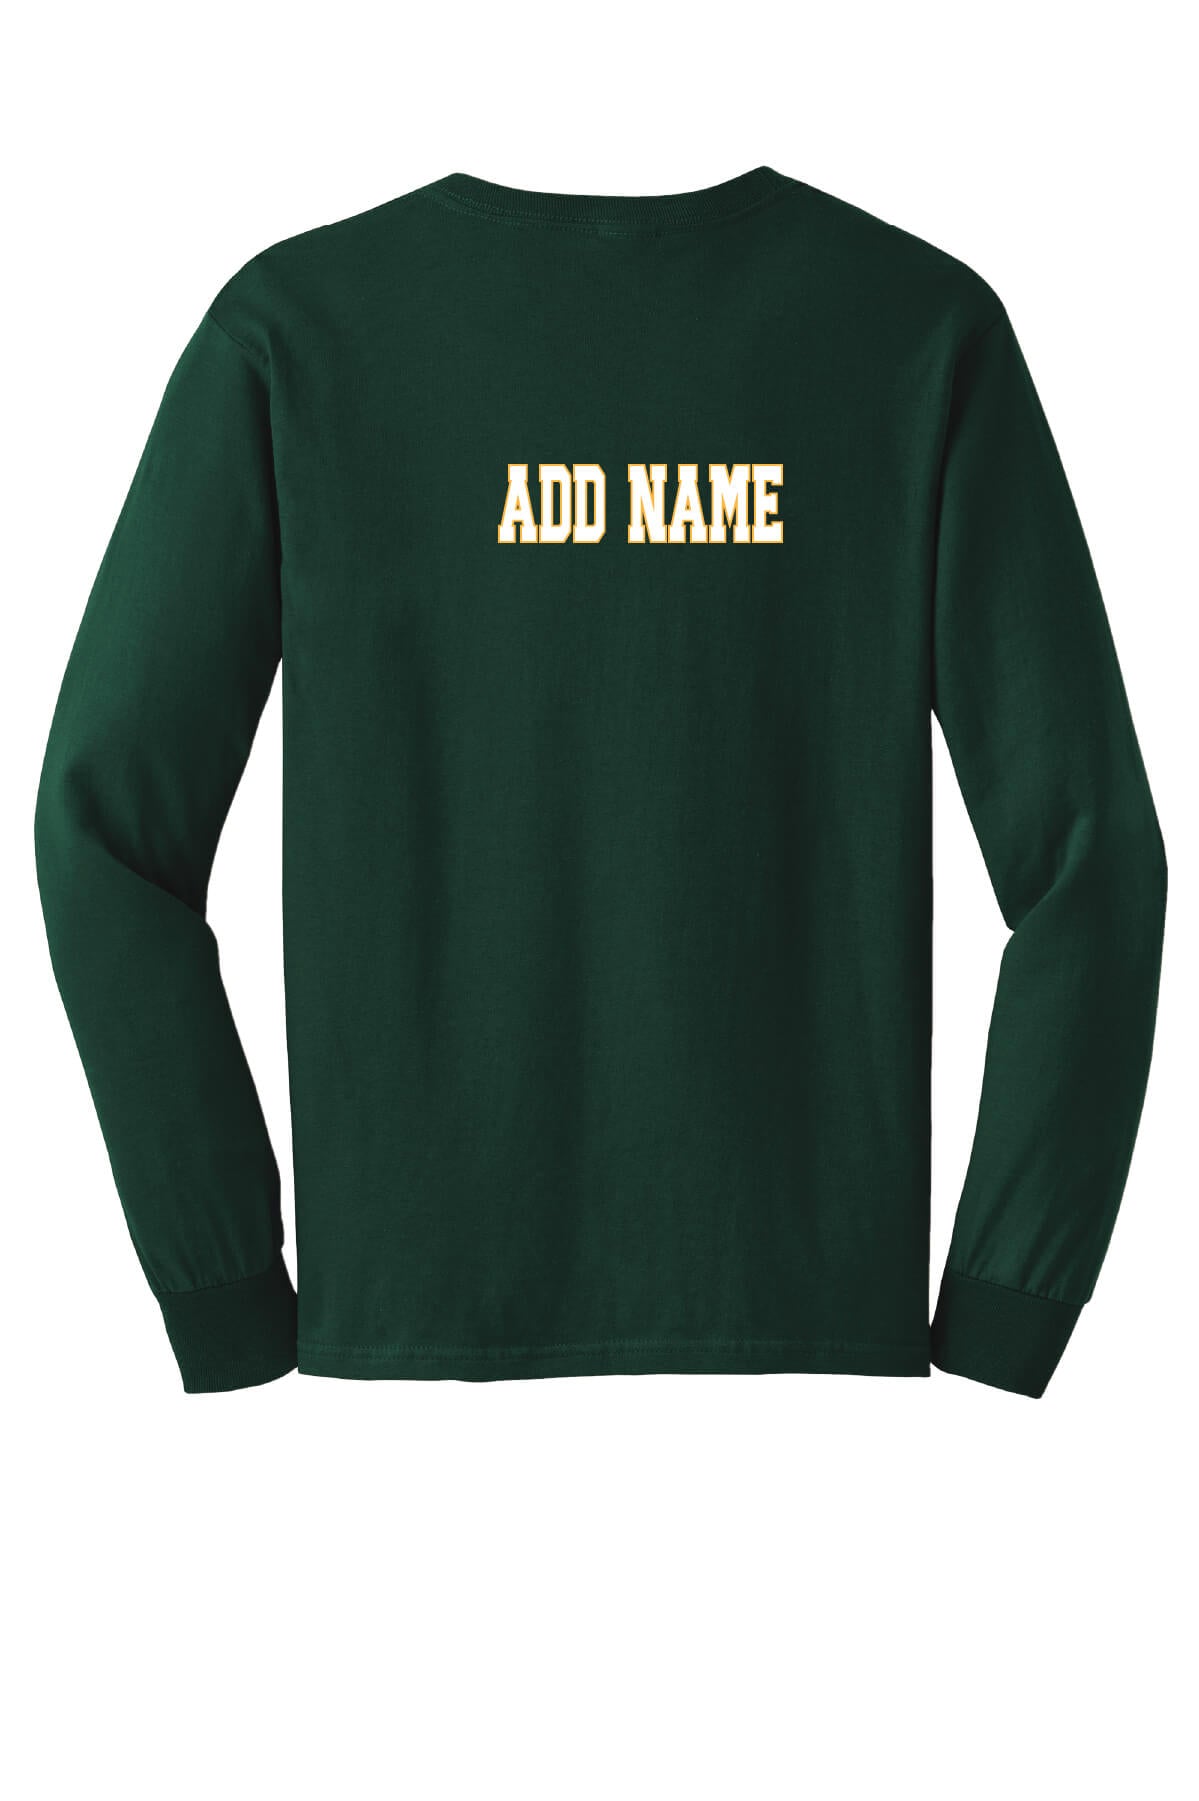 Notre Dame Spartans Long Sleeve T-Shirt back-green